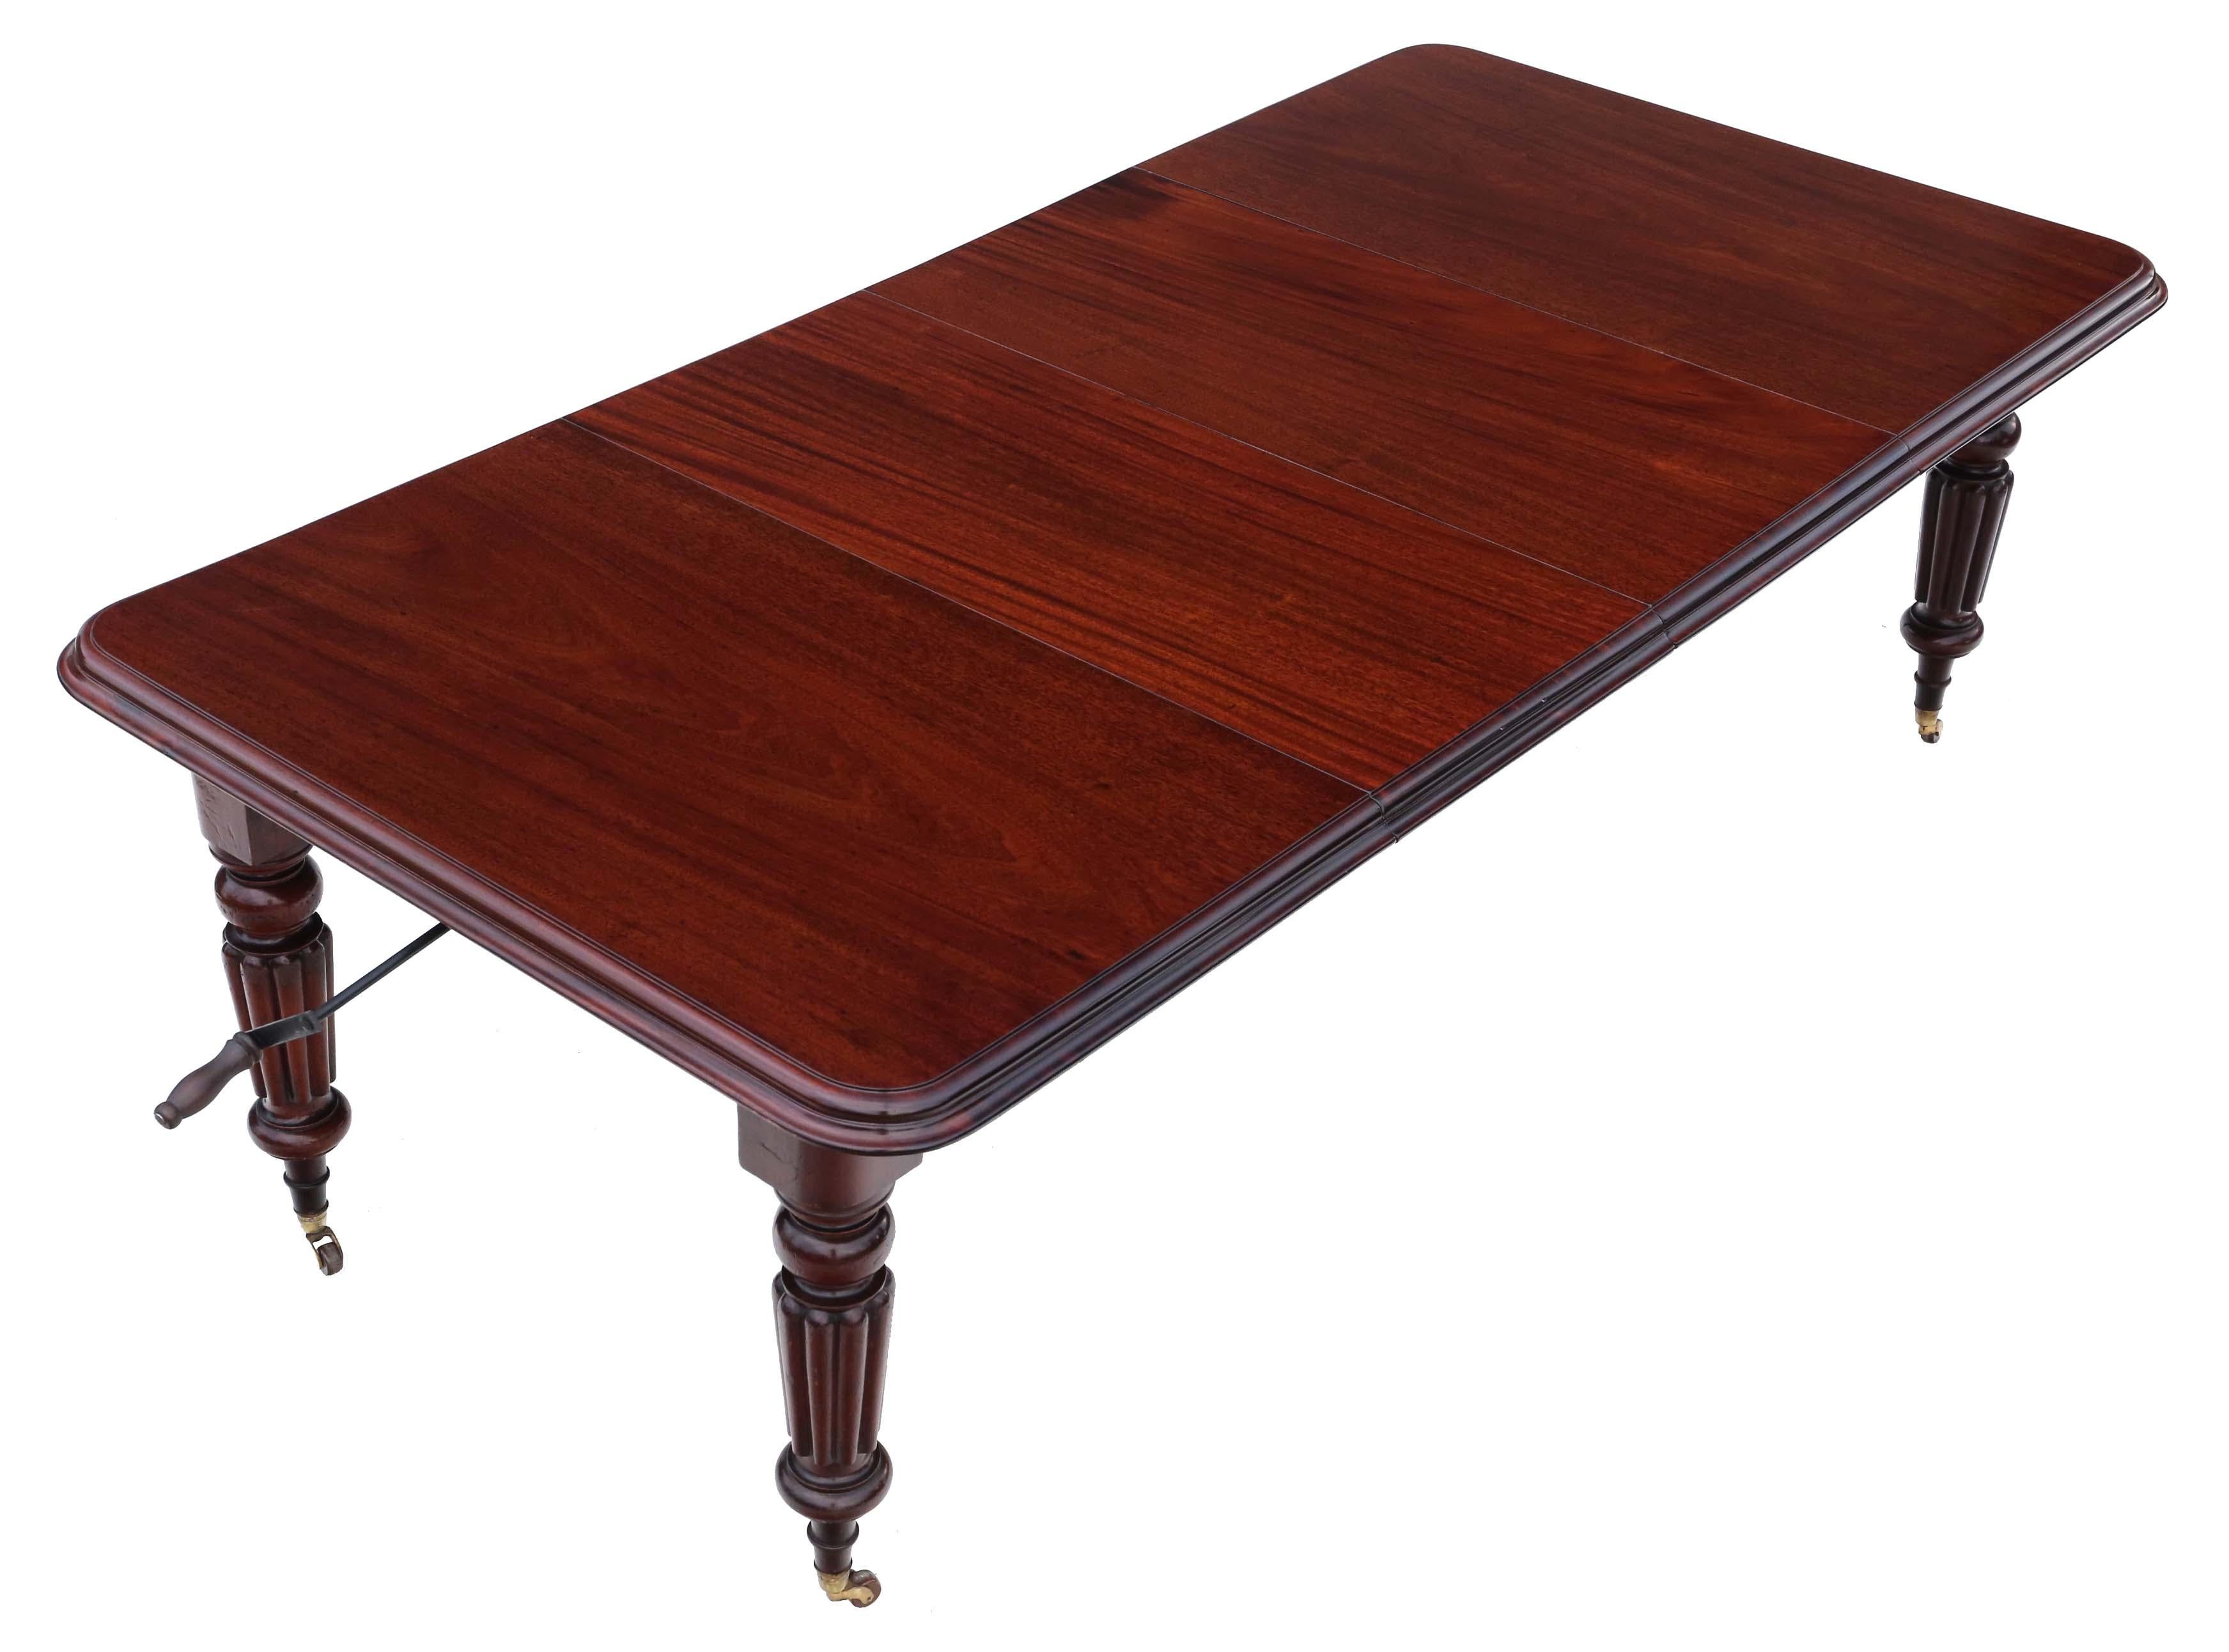 Antique large 2-leaf Victorian wind-out extending dining table just under 8' x 4' (see exact dimensions below) when extended.

A lovely table dating from circa 1850.

This is a quality (better than most) table, that is full of age, charm and